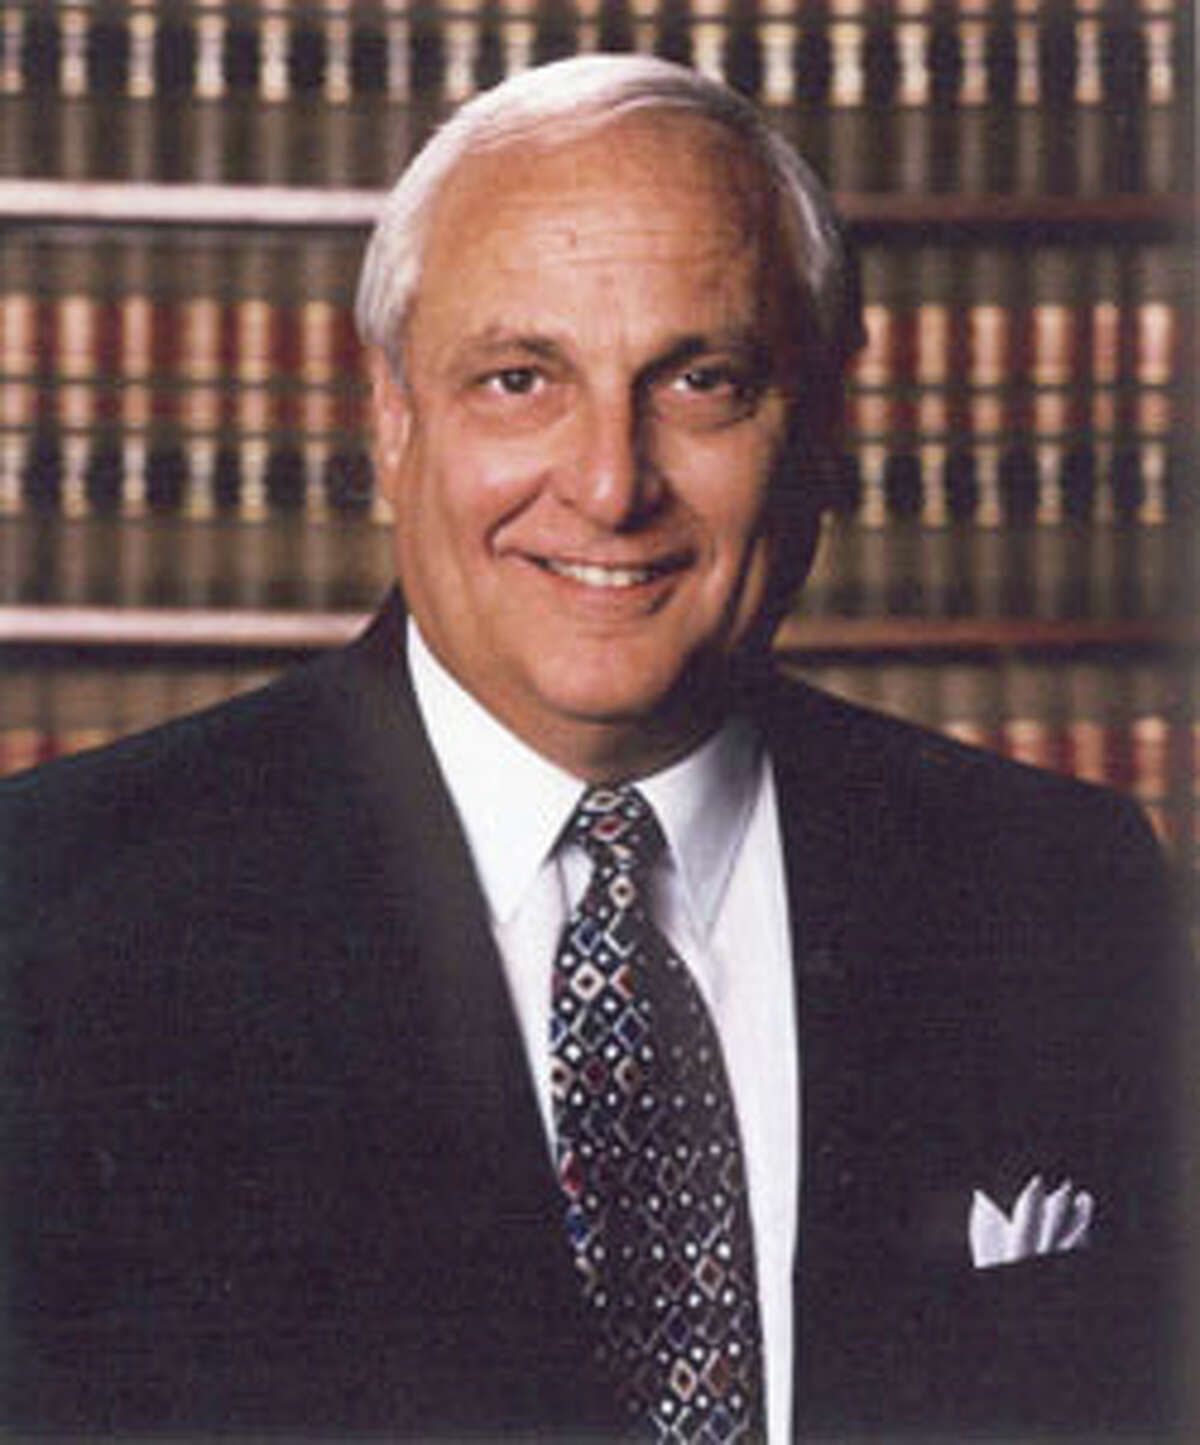 Judge J. Kent Adams Judge Adams was appointed by Harris County Commissioners Court on March 1, 2001 as the presiding judge of Harris County Justice of the Peace Court, Precinct Four, Position One. Elected to the Justice of the Peace Court, Precinct Four, Position One to complete an un-expired term ending December 31, 2004. He was re-elected for a four-year term in March 2004, and Judge Adams was re-elected without opposition in 2008.